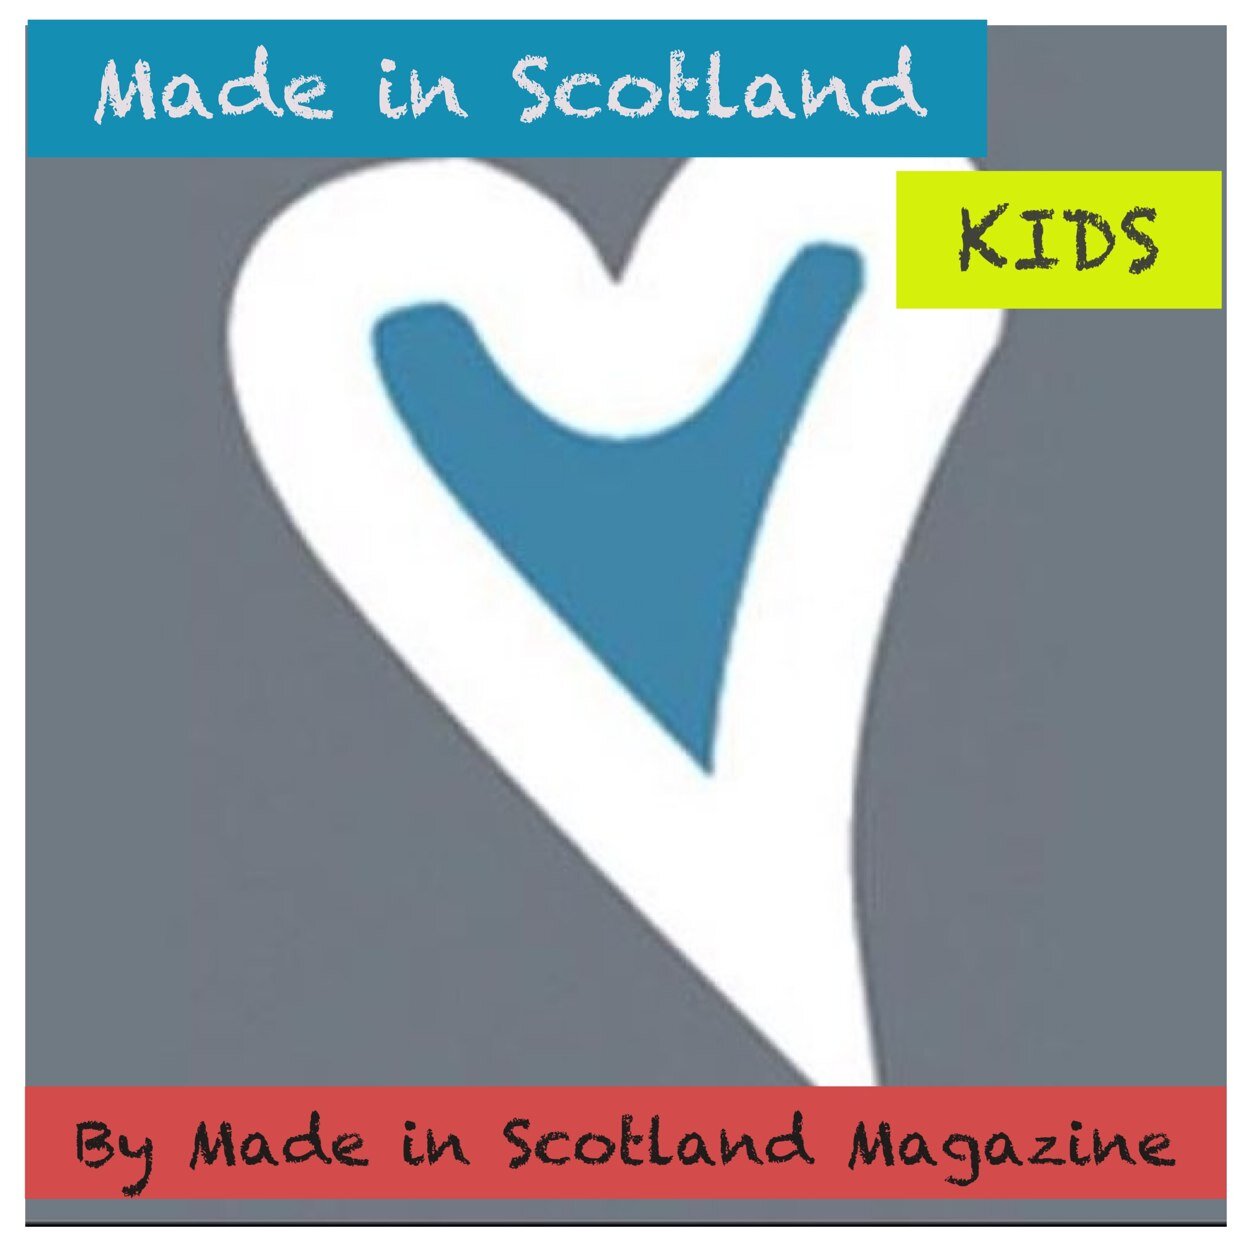 New mag & directory launches 2015. Child-friendly bistros & bolt-holes; cool clothes & gifts; places to visit & kids' events! Sister mag to @madescotlandmag